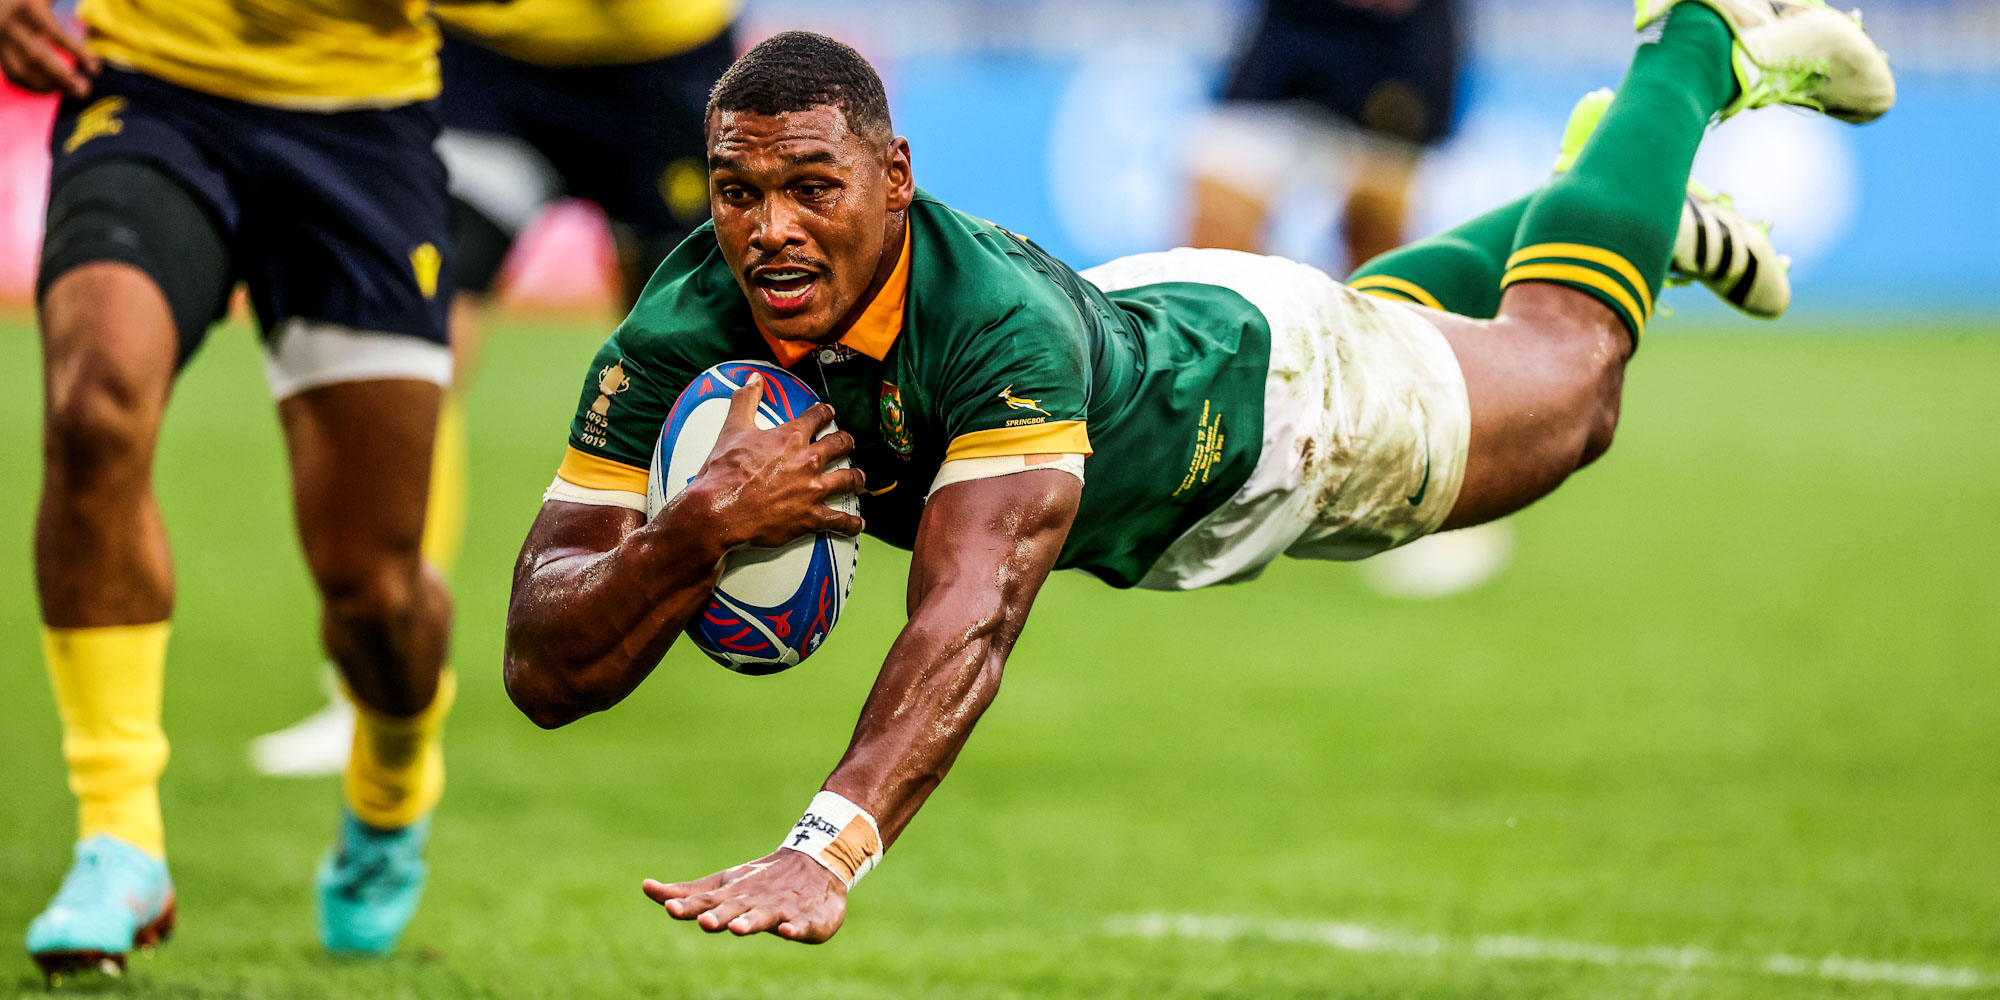 Damian Willemse goes over for a try against Romania.